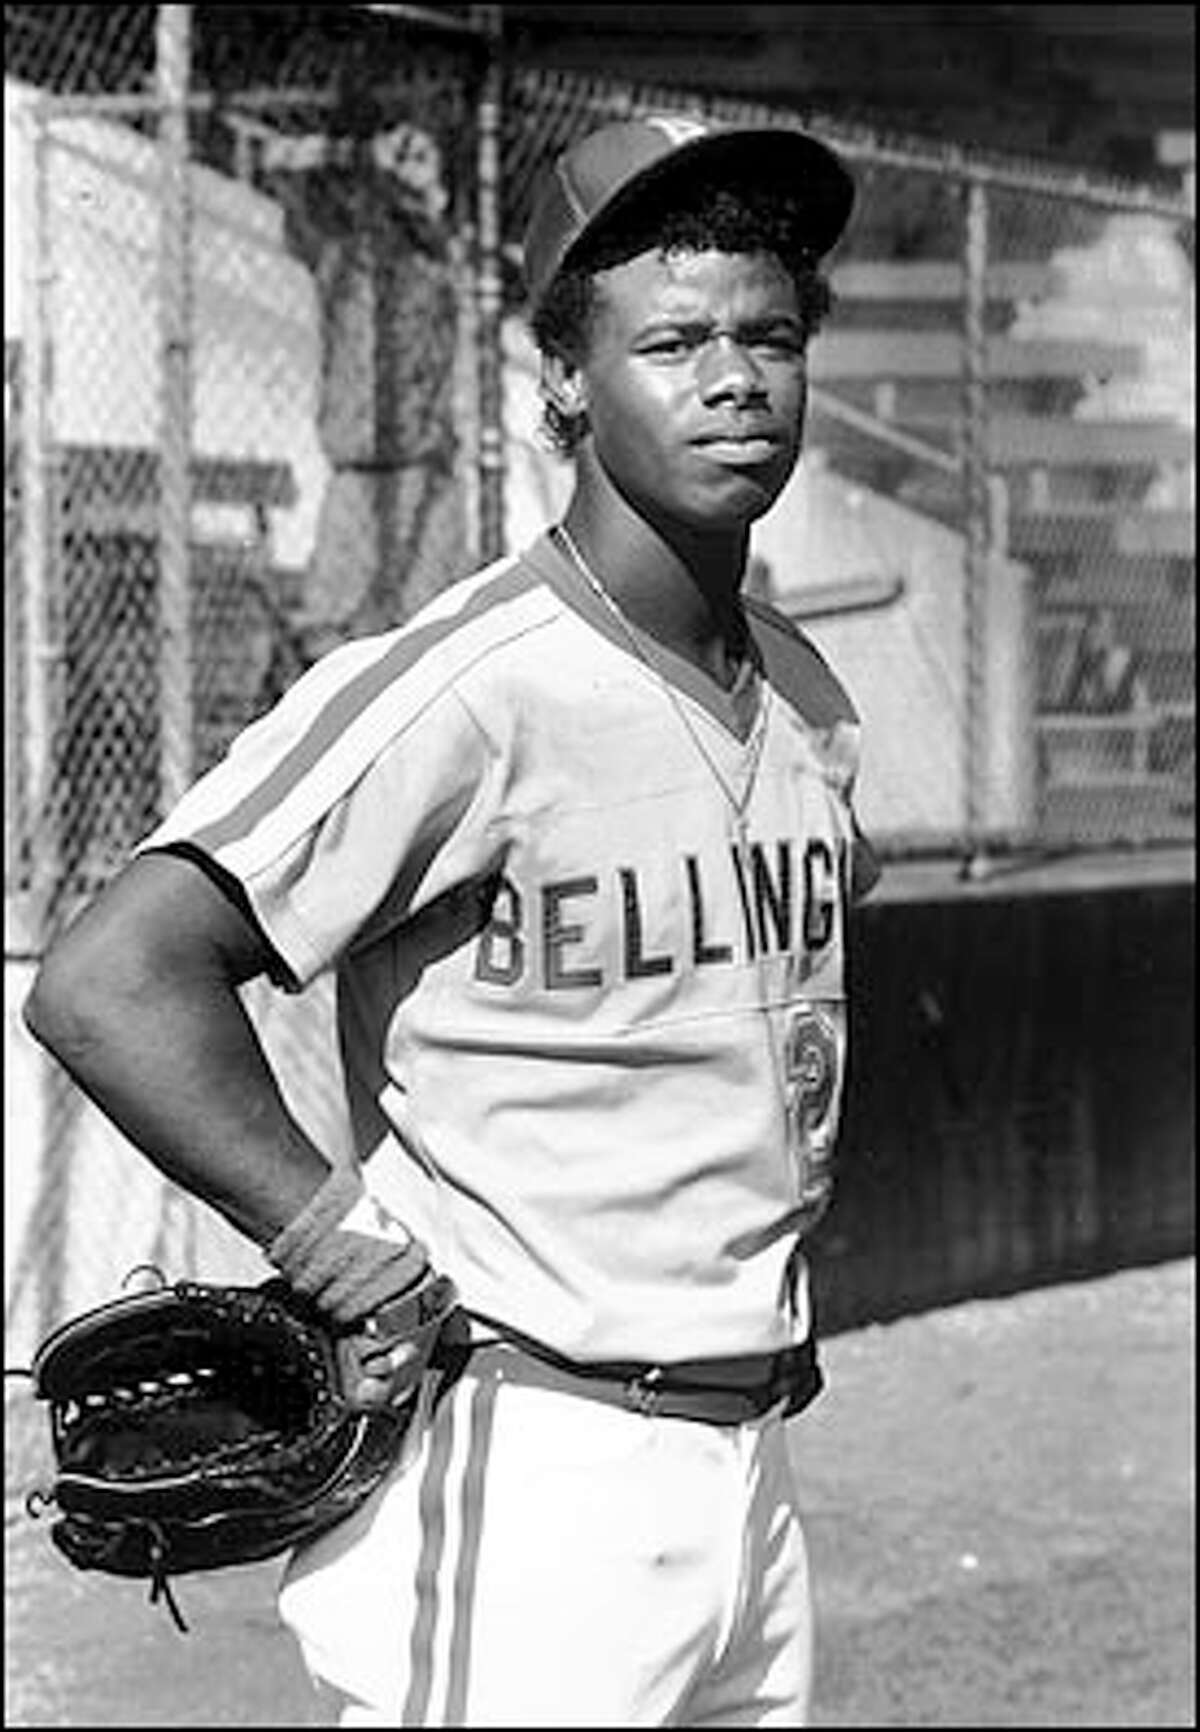 Griffey in the uniform of the Class A Bellingham Mariners, with which he started his professional career.